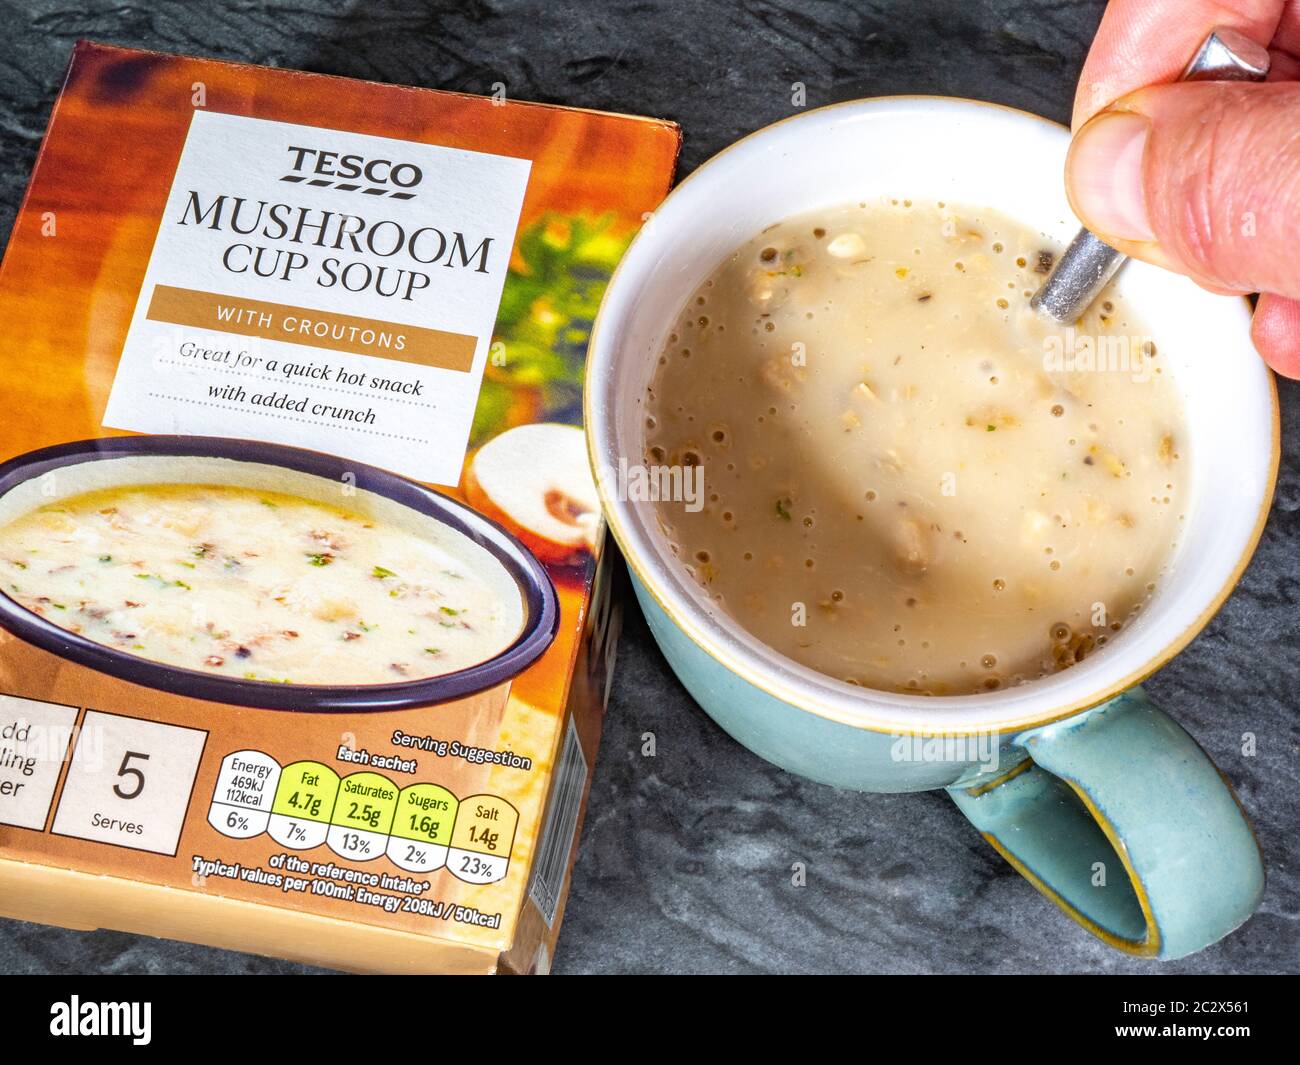 Tesco own brand mushroom soup with croutons – a product box and a sachet of dry soup mixed with with boiling water, being stirred in a cup. Stock Photo